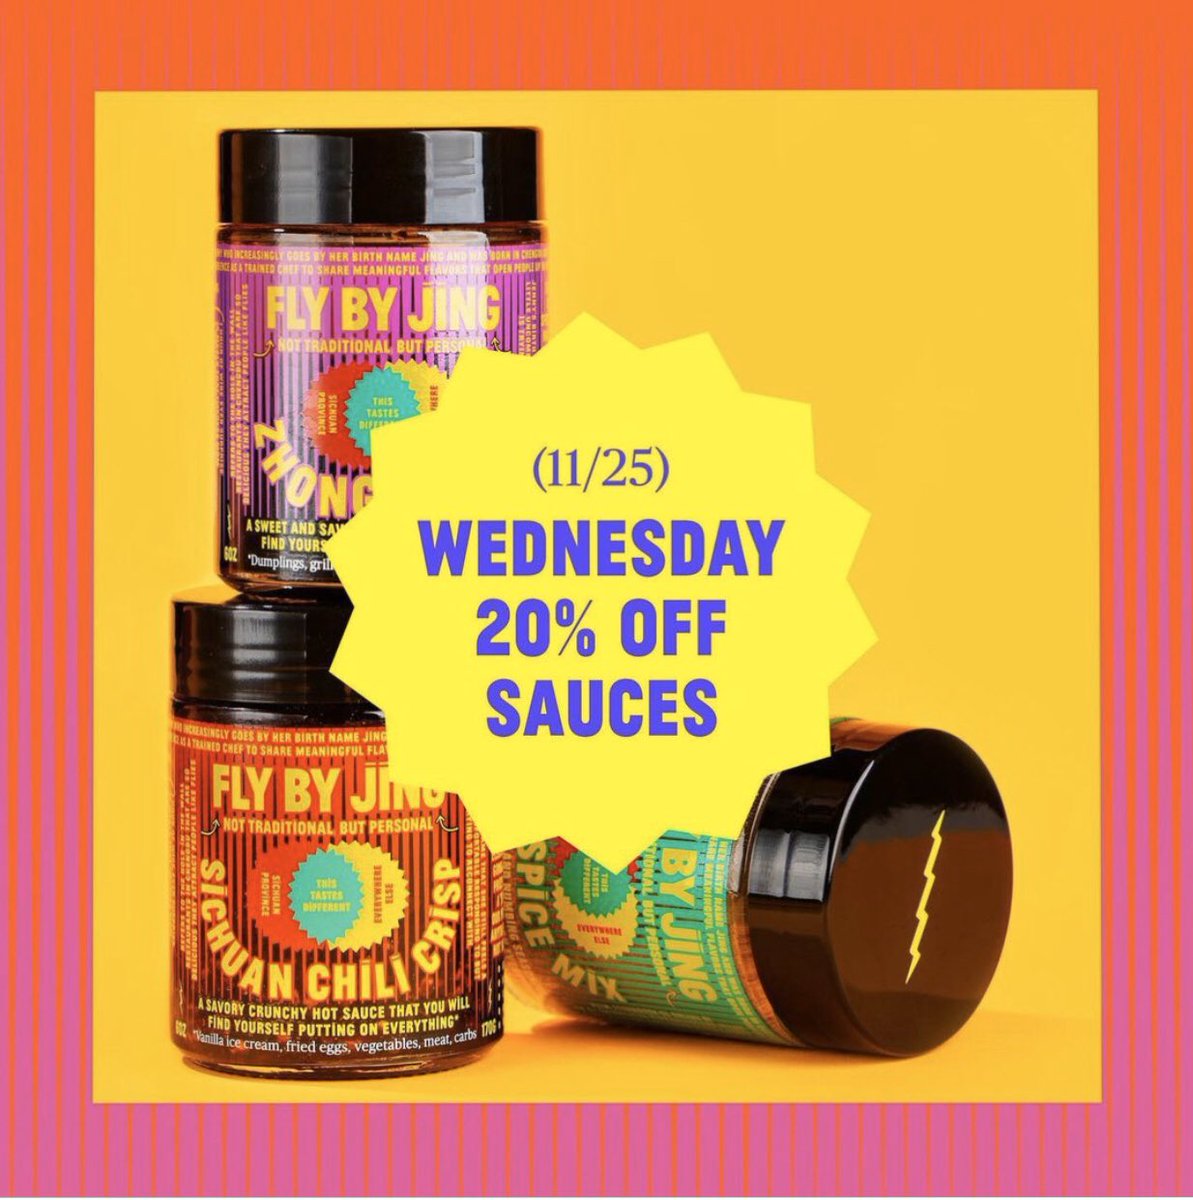  @flybyjing made it fun and entertaining with 5 days of fire deals on their signatures condiments, gift sets, and even suits made for sweating. And if you are getting anything from them, make sure to try the Sichuan Chili Crisp. It's hot, bold, spicy!